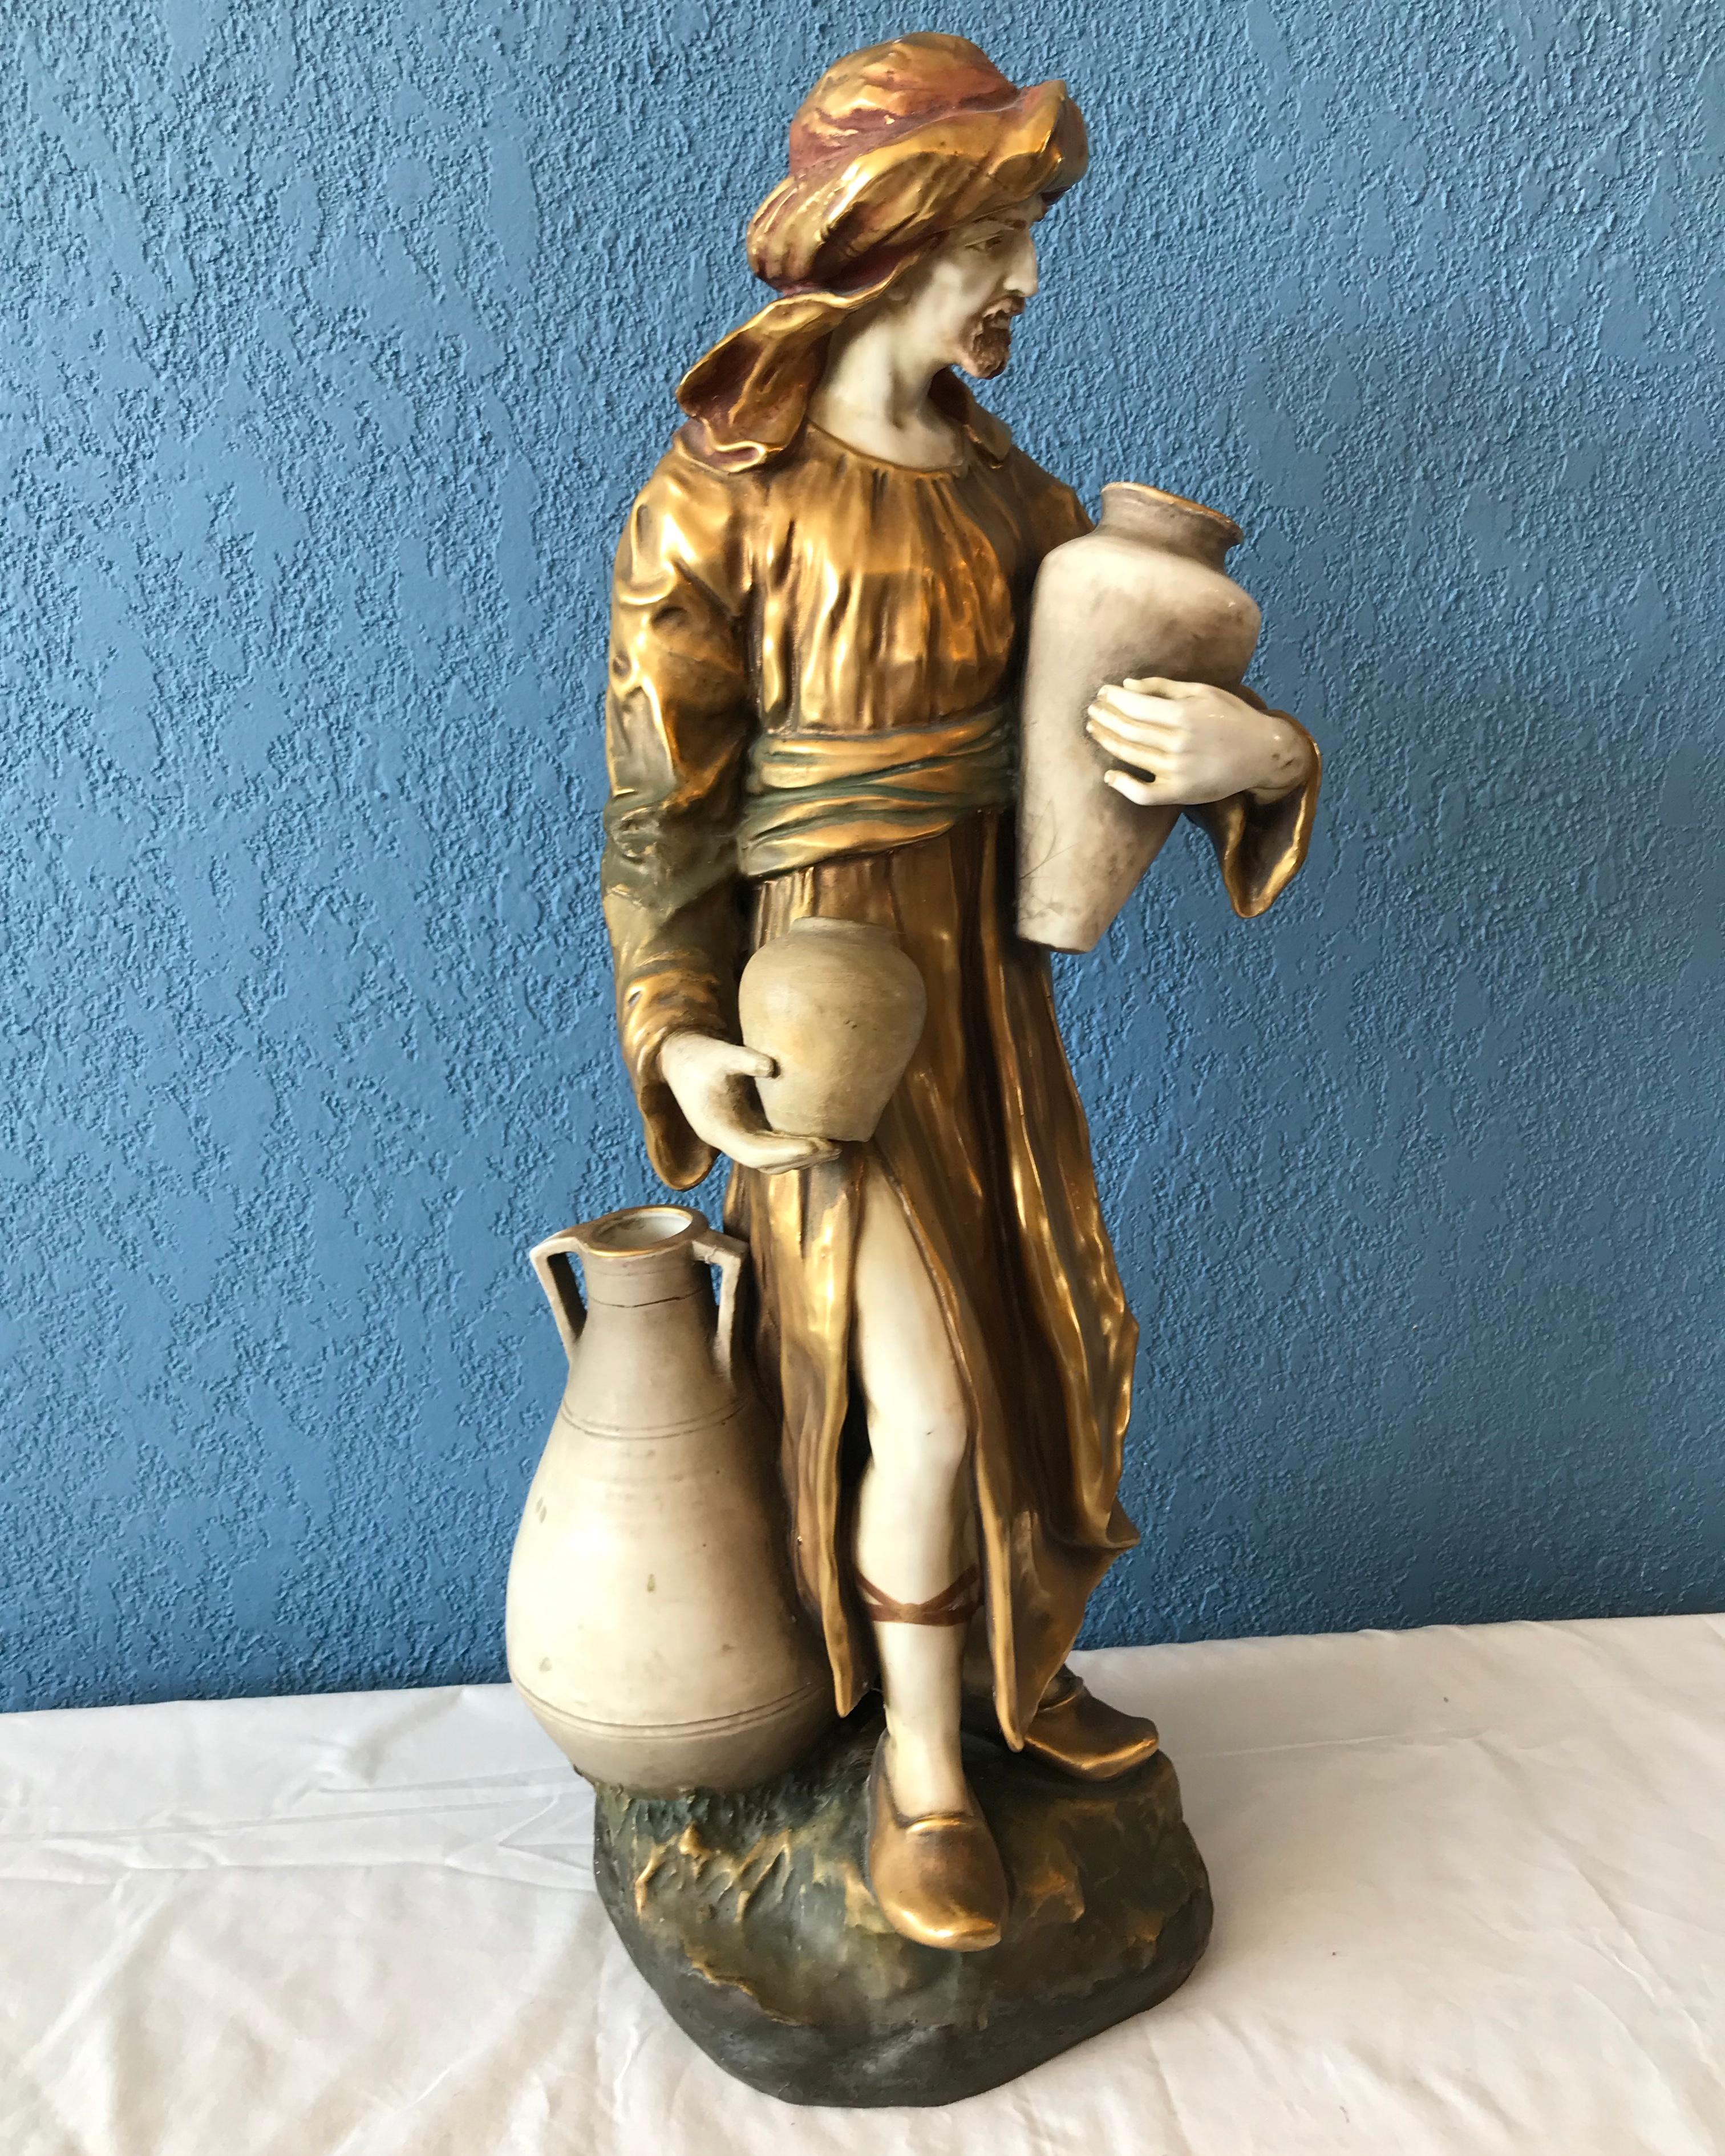 In the style of Amphora and other Bohemian creators. The figure is garbed in gilded robe and turban.
He is posed holding 2 jugs, a third at his feet. 
A bold and dramatic piece.